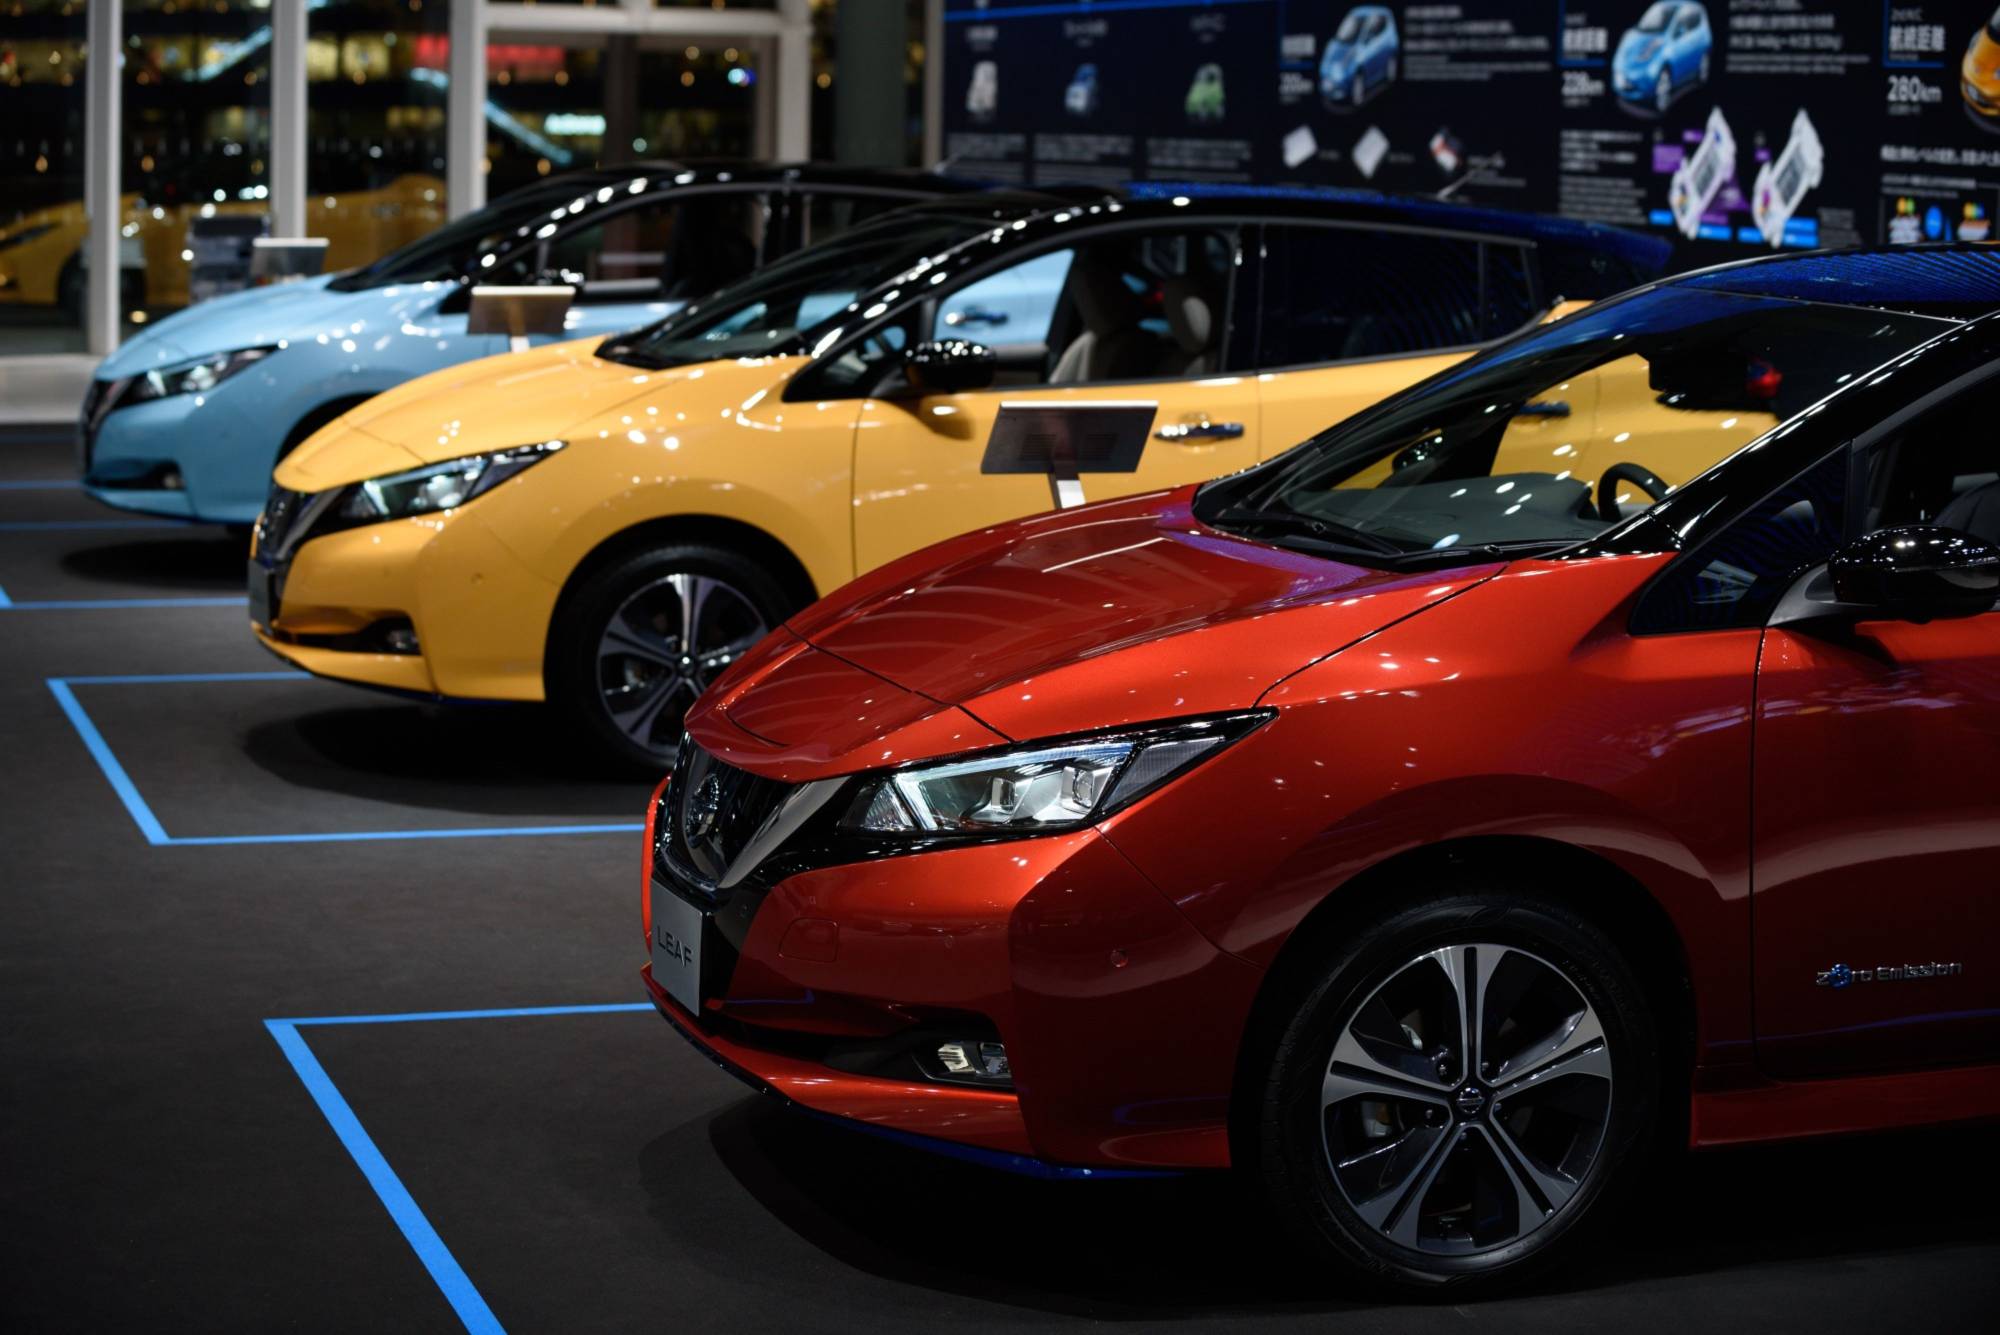 Nissan Leaf electric vehicles. The model, first introduced in 2010, is the only passenger EV in production that offers what is known as vehicle-to-grid capability. | BLOOMBERG 